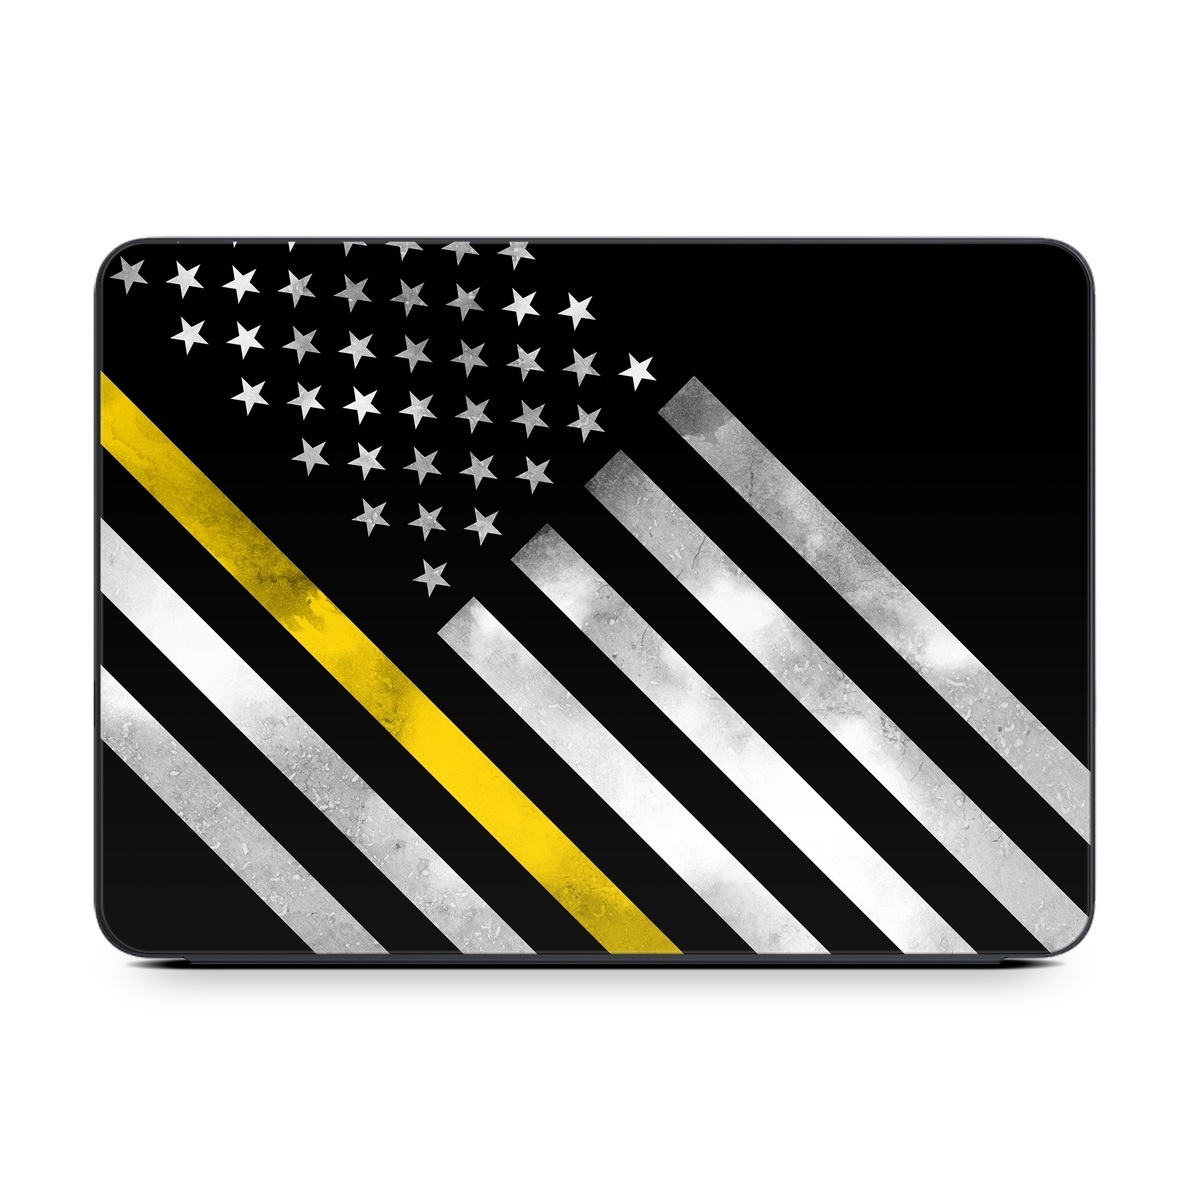 Smart Keyboard Folio for iPad Series Skin design of Flag of the united states, Flag, Yellow, Line, Black-and-white, Pattern, Monochrome, Graphic design, Parallel, with black, white, gray, yellow colors